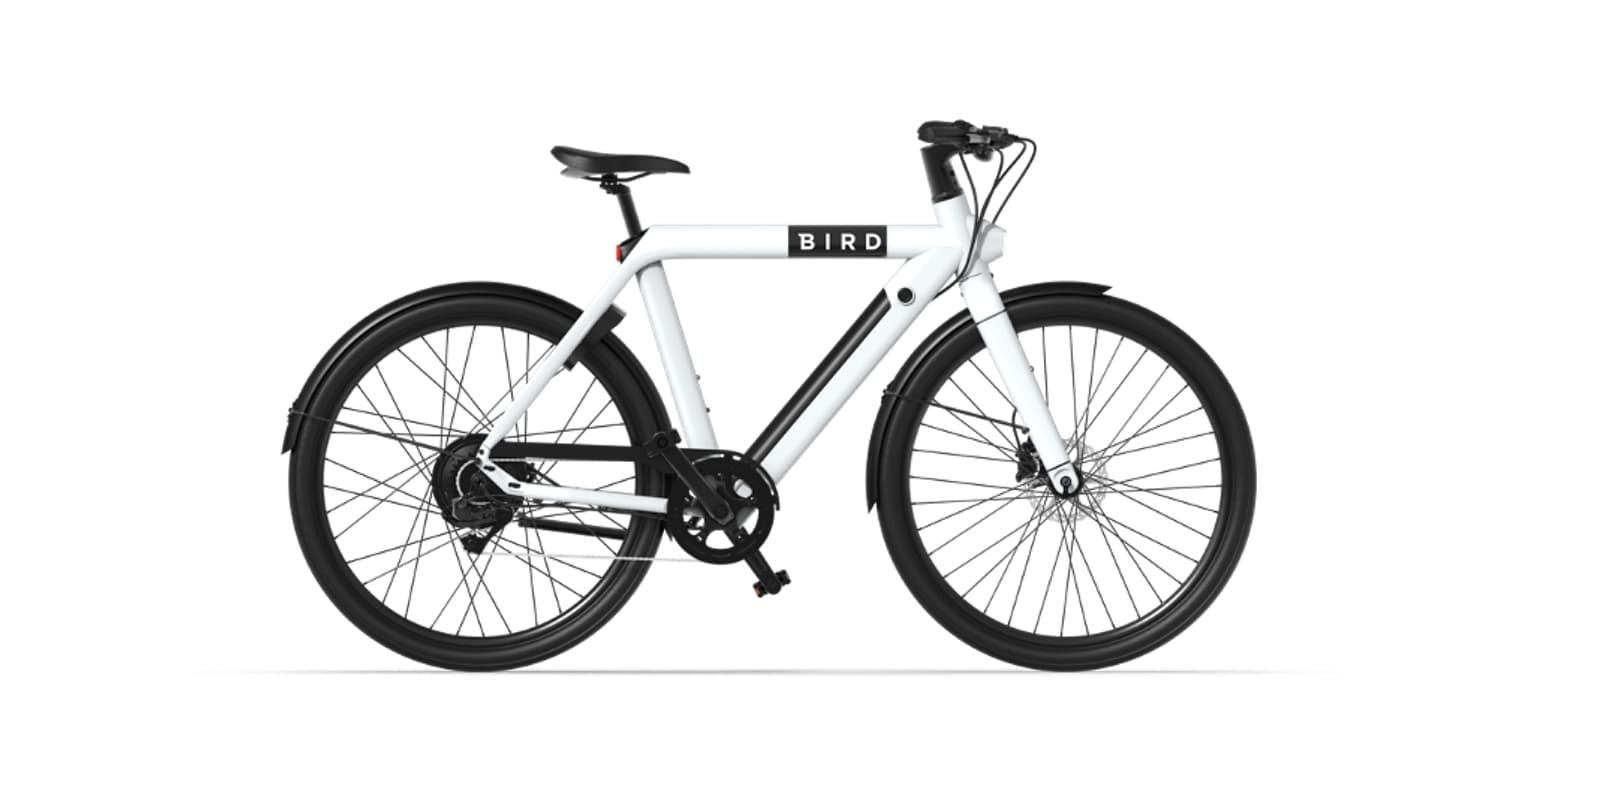 Bird launches new electric bikes with updated designs Electric